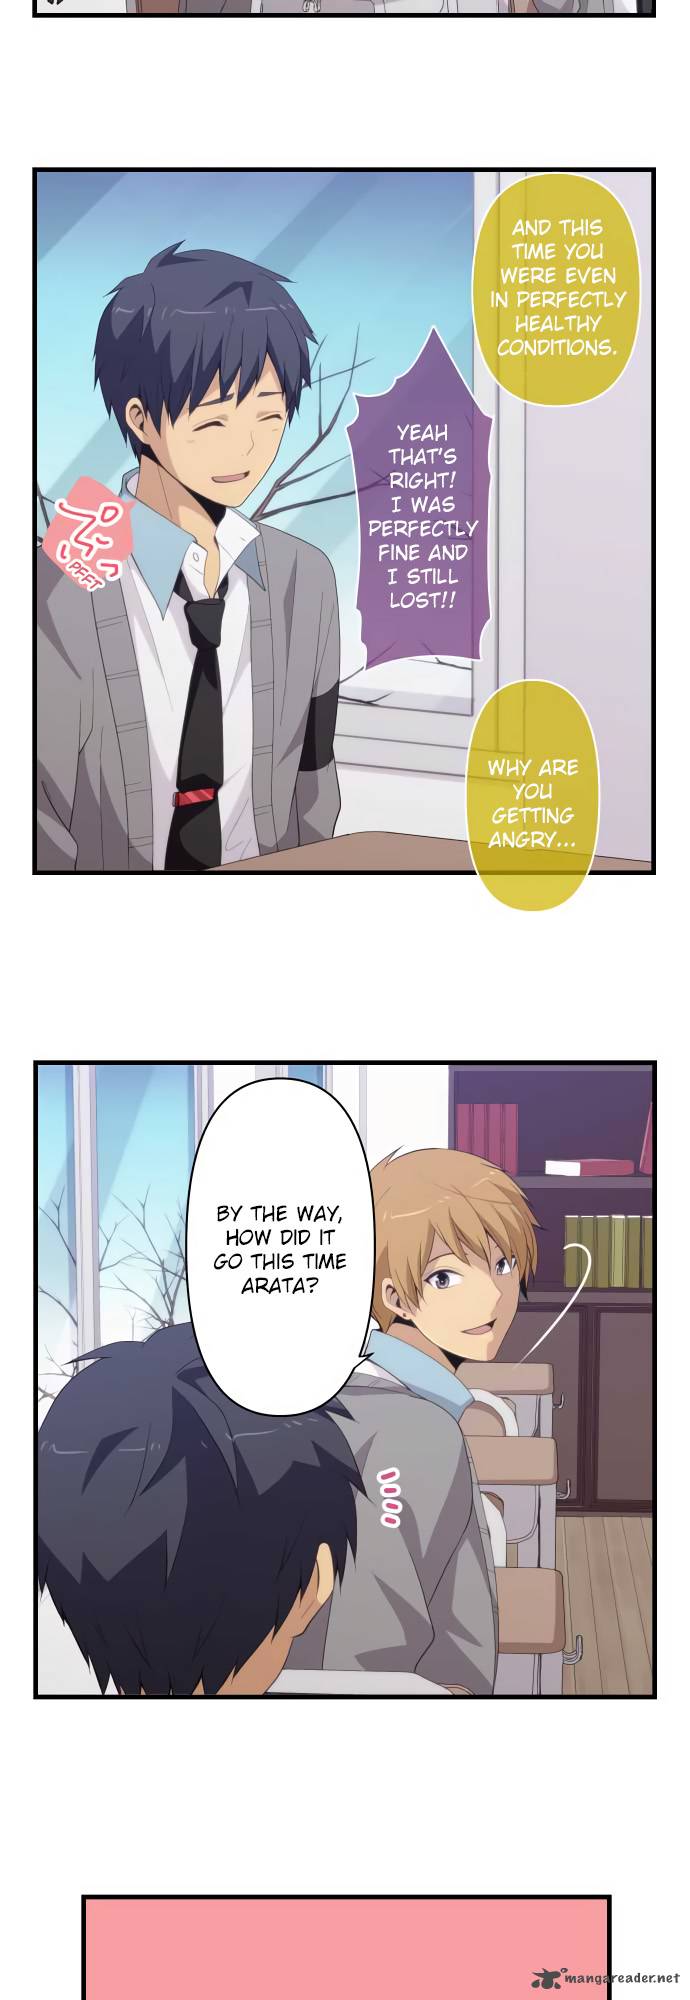 Relife 203 6